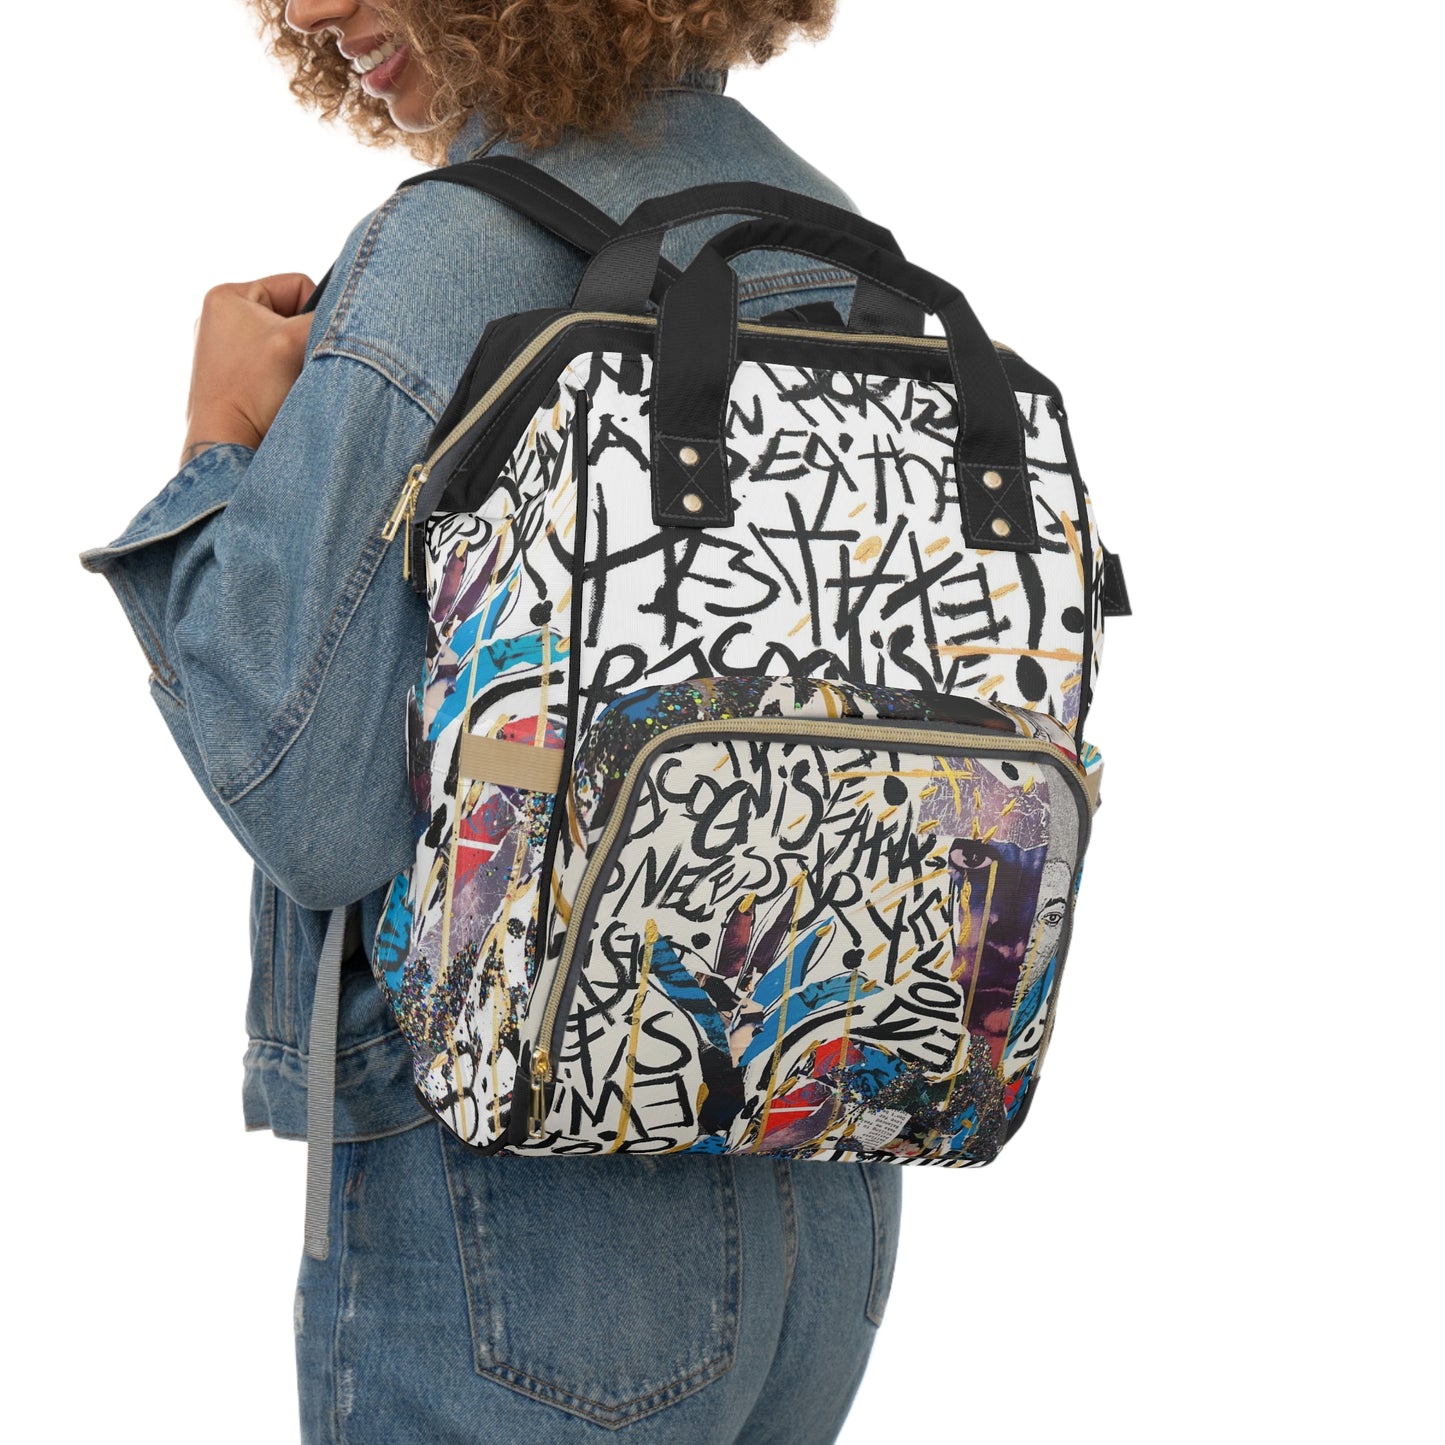 "Multitudes Within by Courtney Minor" Multifunctional Backpack